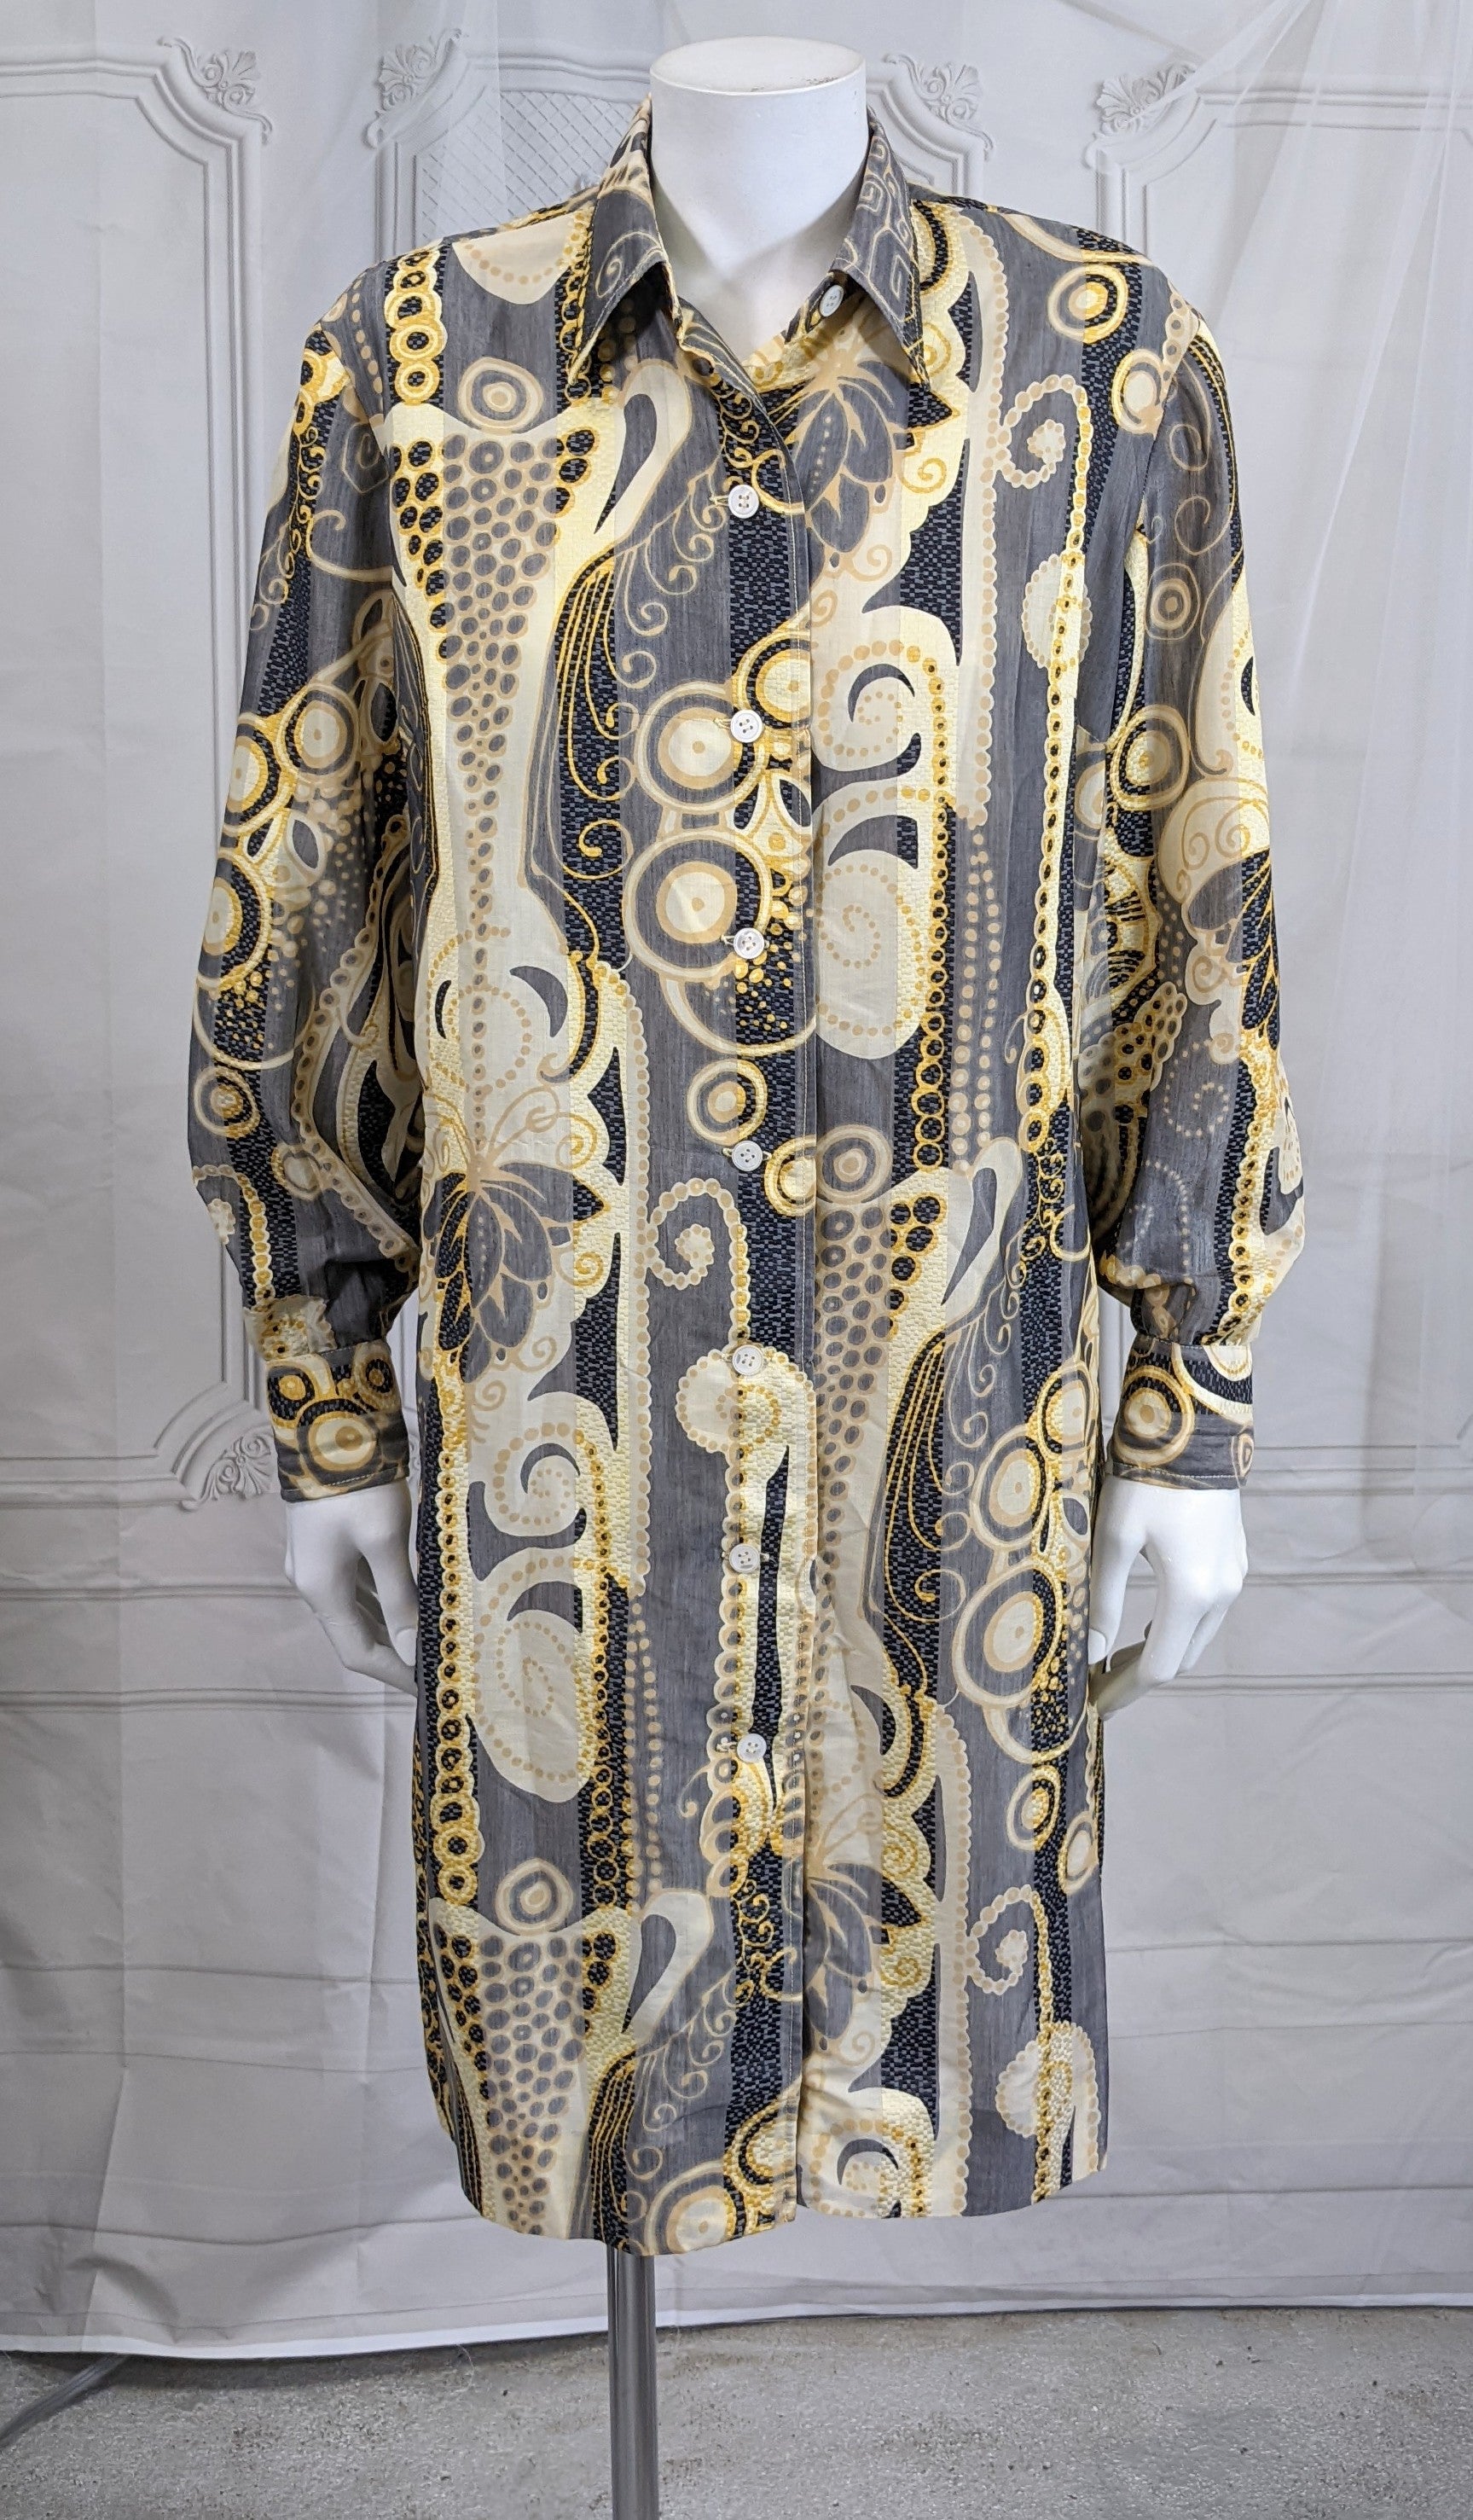 J. Tiktiner Silk Blend Shirtwaist in abstract organza silk blend fabric. Abstract Klimt like patterns overlaid over a wide striped which is somewhat sheer, needs a liner/slip. Good Condition. Mother of pearl buttons. 
Vintage size 14, similar to